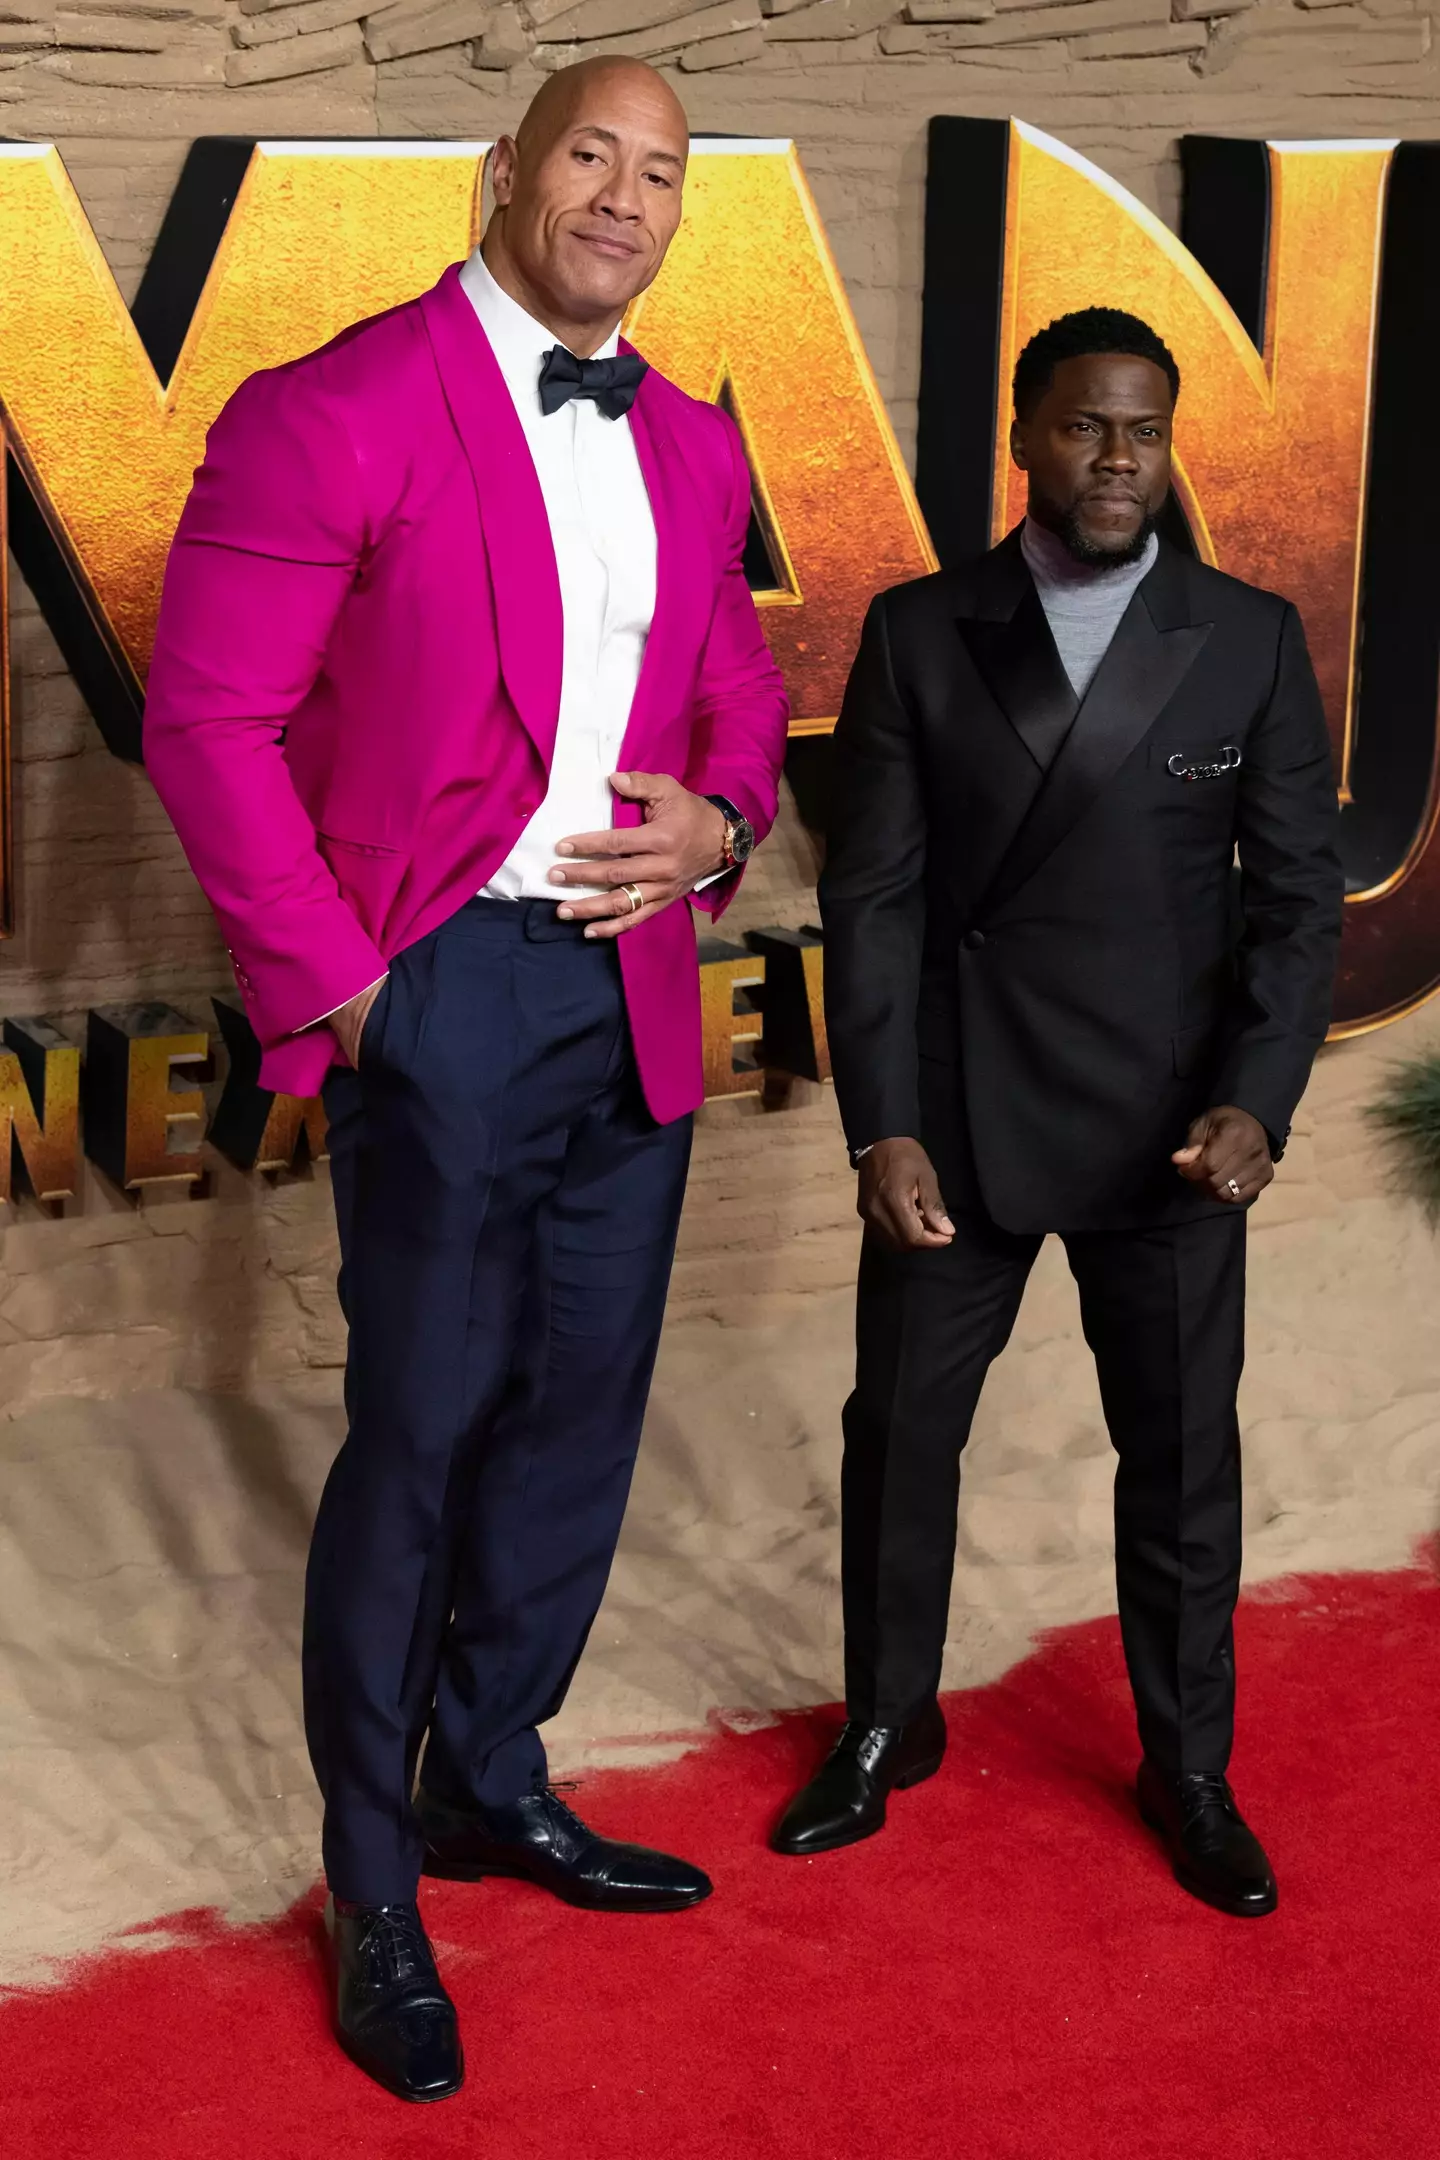 The Rock and Kevin Hart are a few inches apart in height.